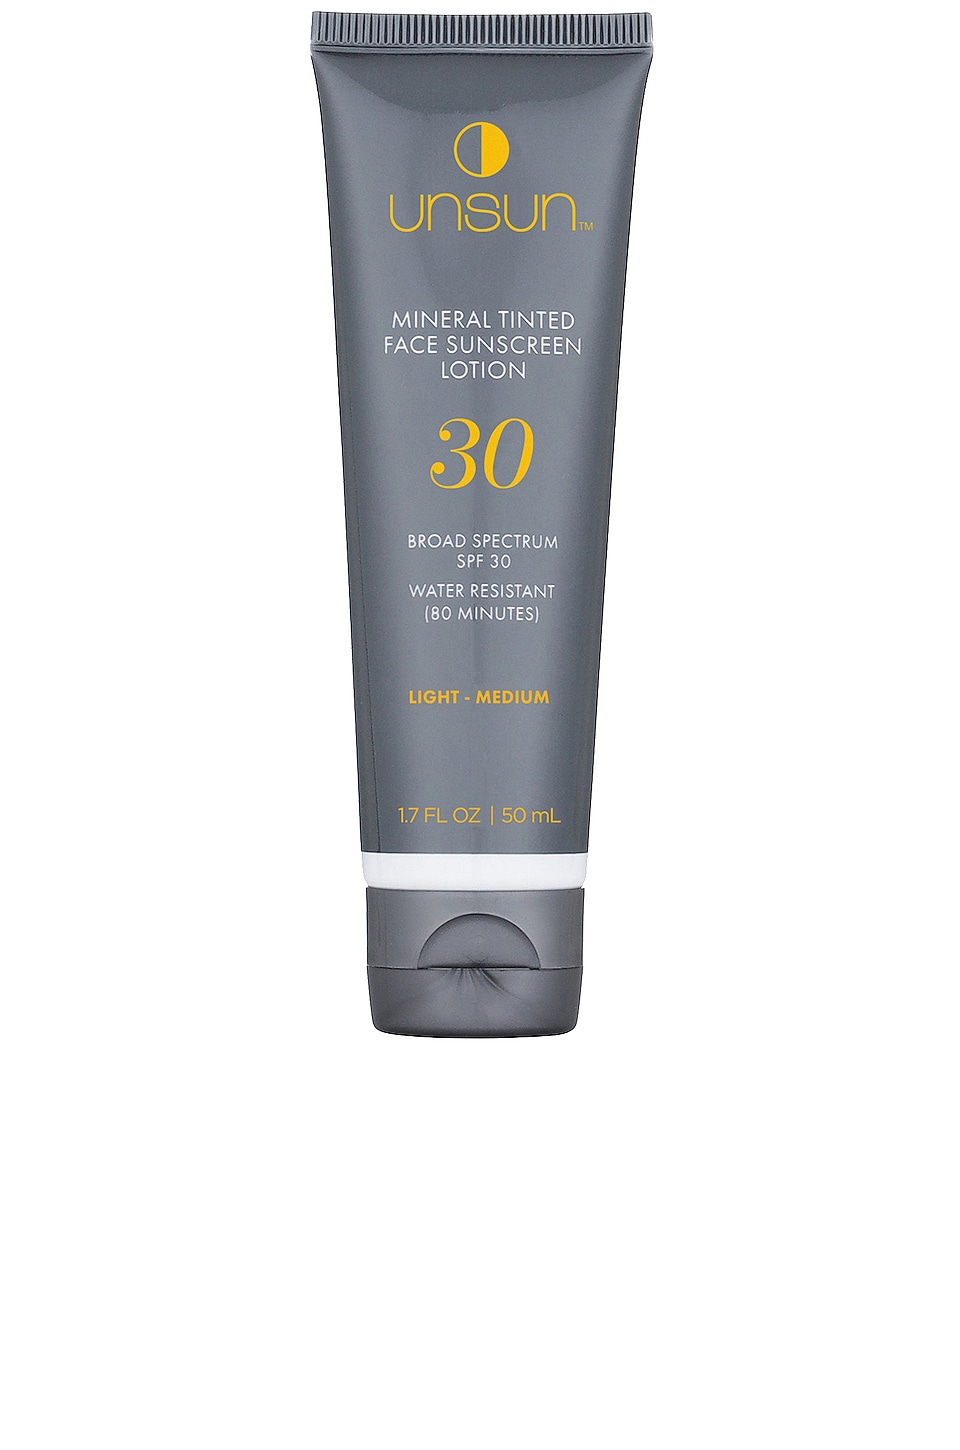 Unsun Cosmetics Mineral Tinted Face Sunscreen Lotion SPF 30